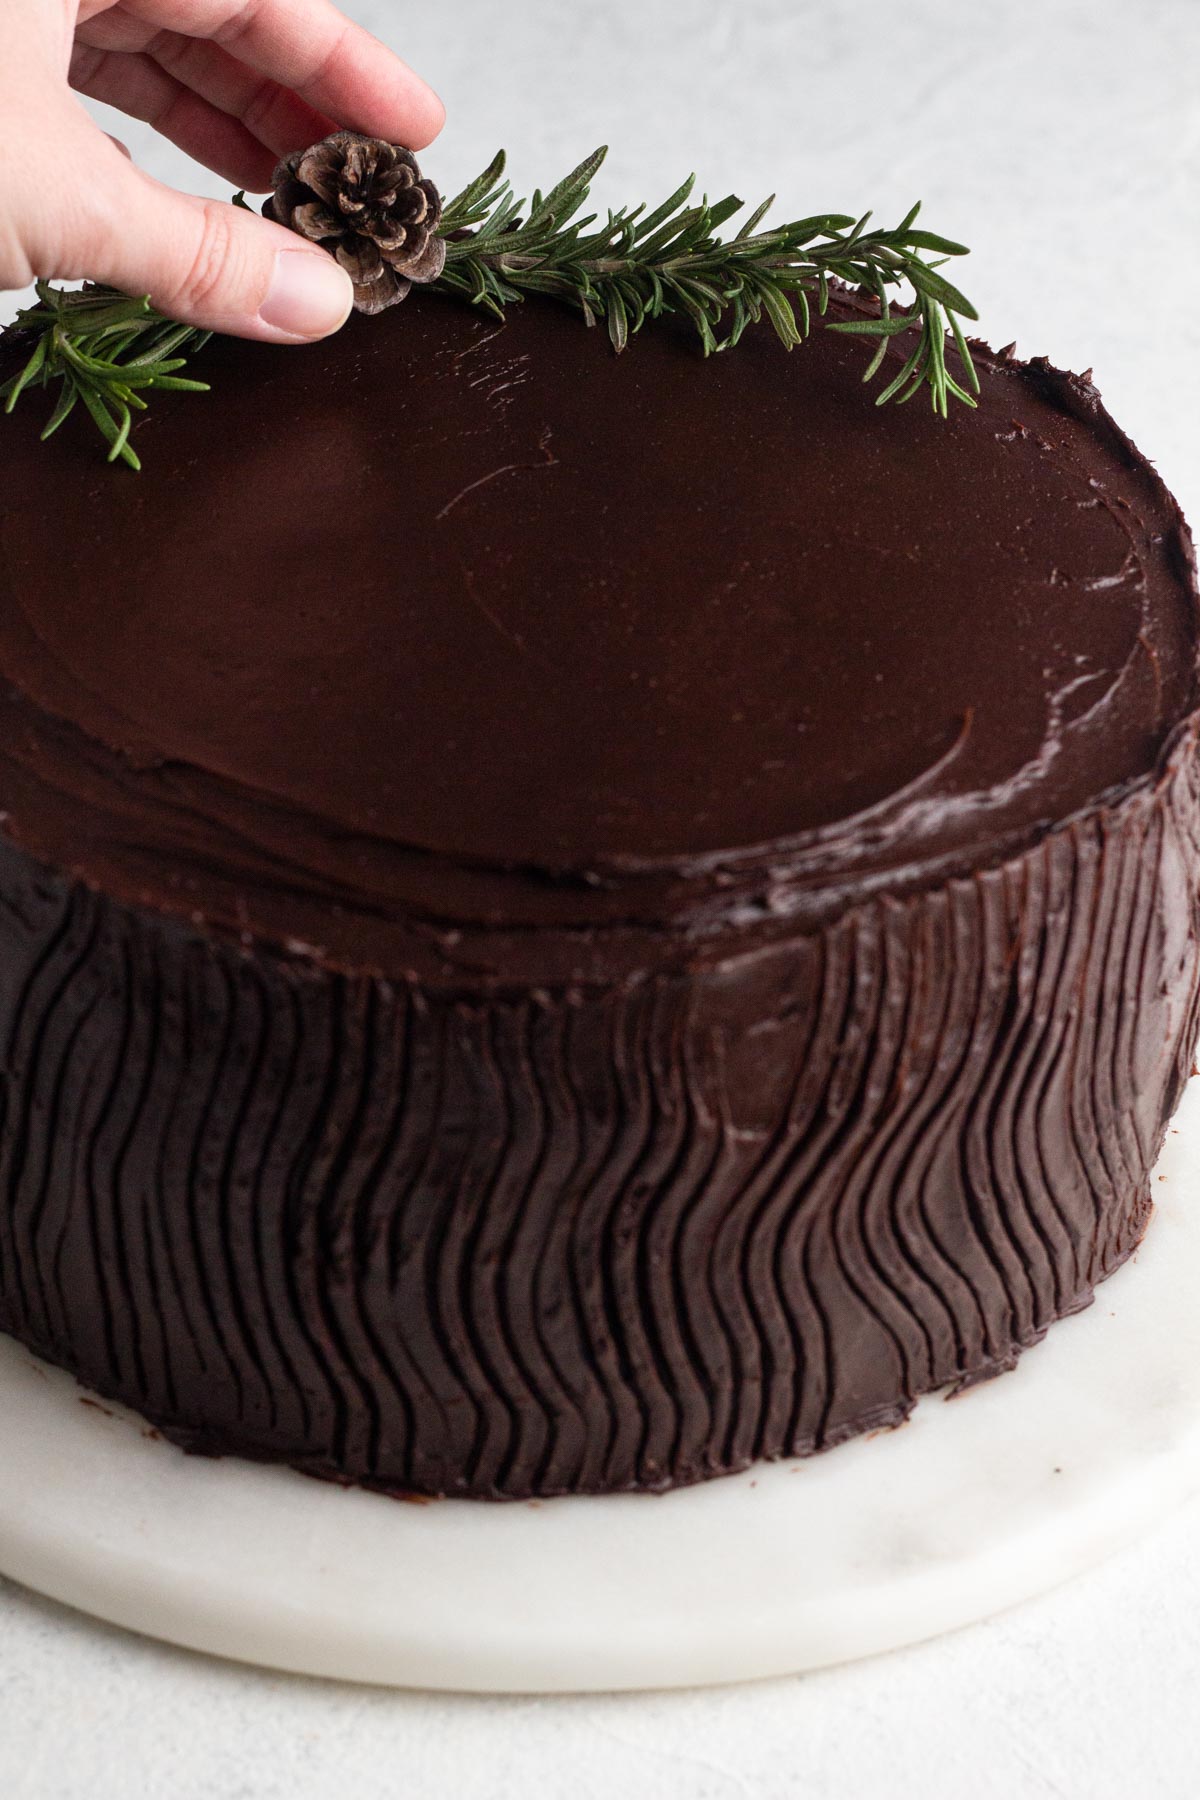 Hand placing a small pinecone onto the top of a chocolate-frosted cake garnished with sprigs of rosemary.